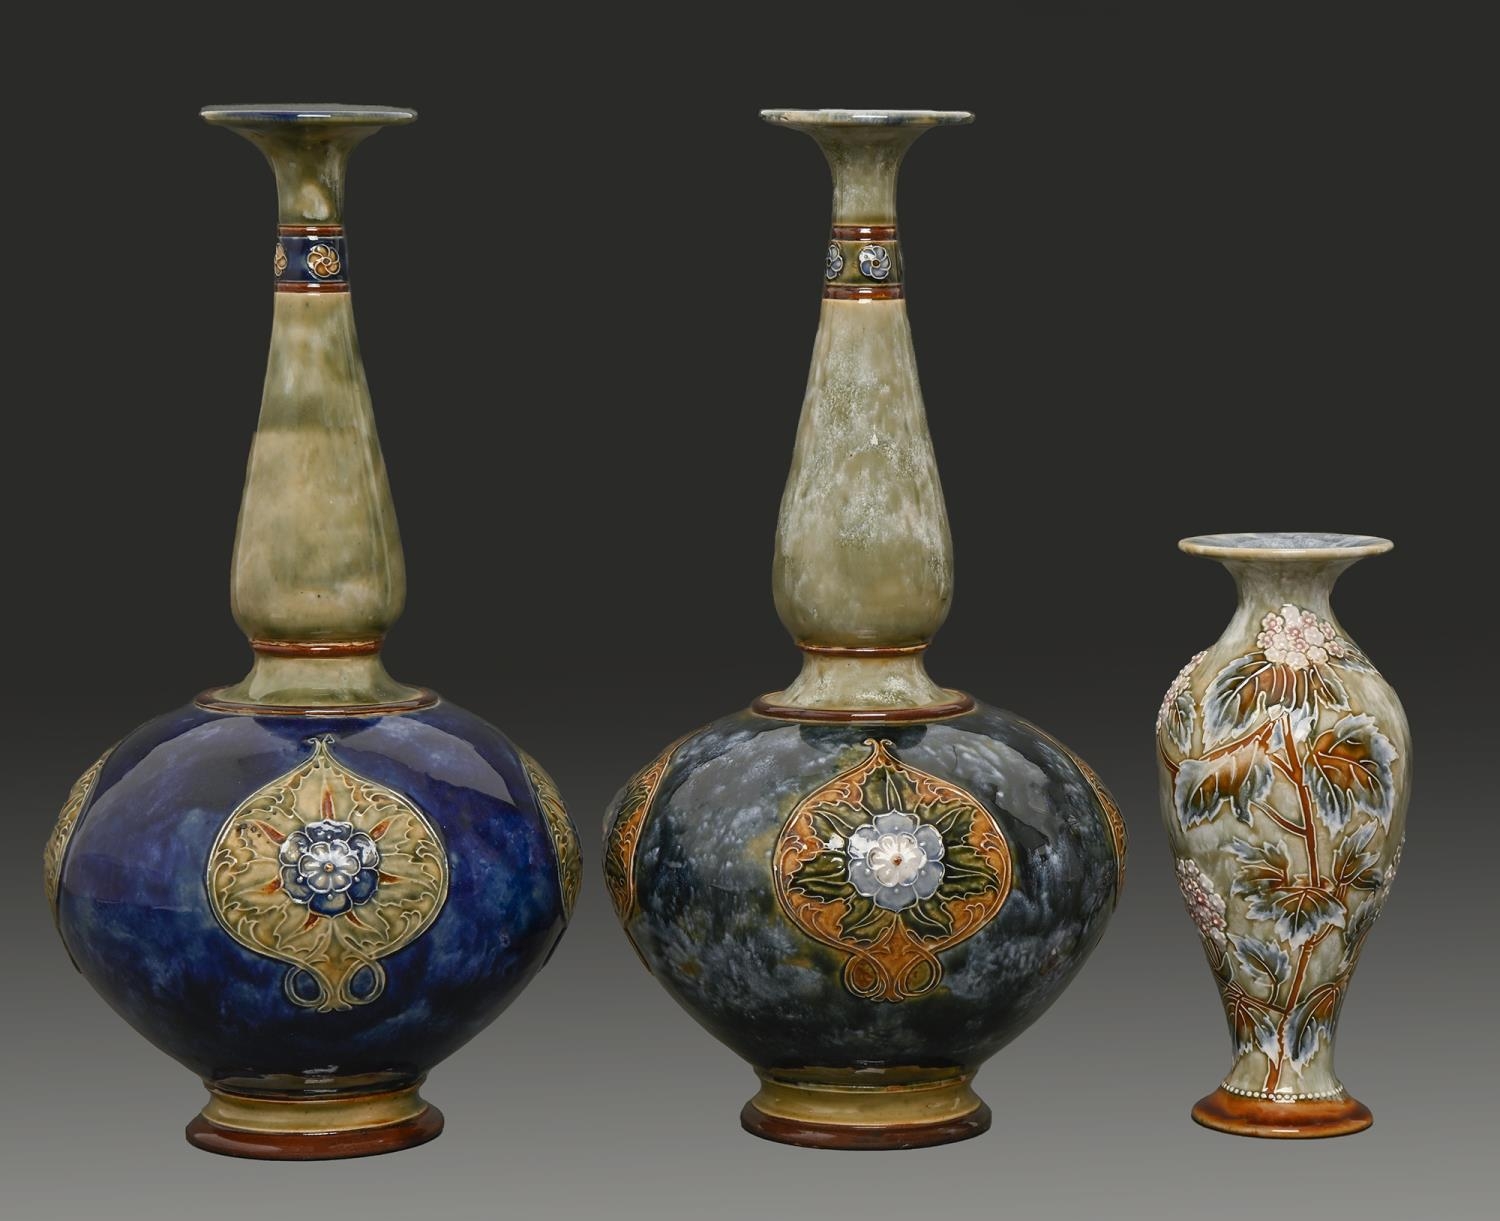 Three Doulton Ware vases, early 20th c, one decorated by Florence E Roberts with applied flowers and